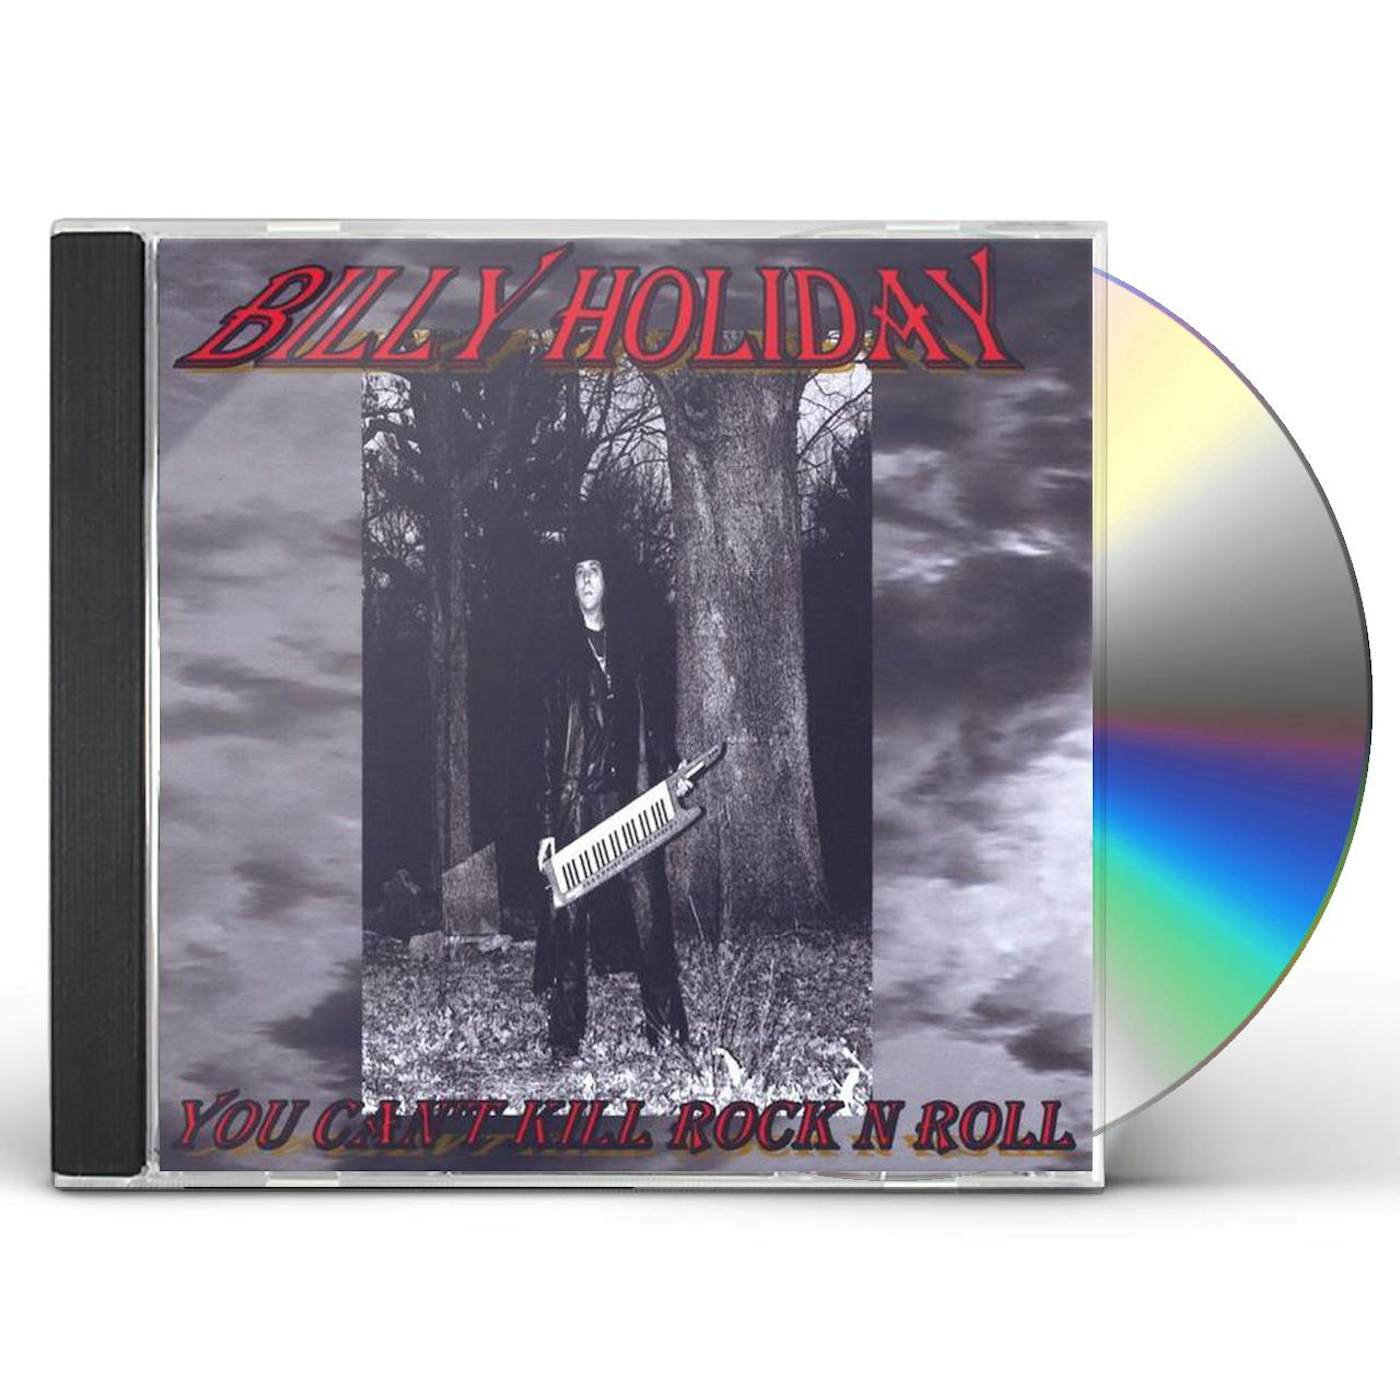 Billy Holiday YOU CAN'T KILL ROCK N ROLL CD